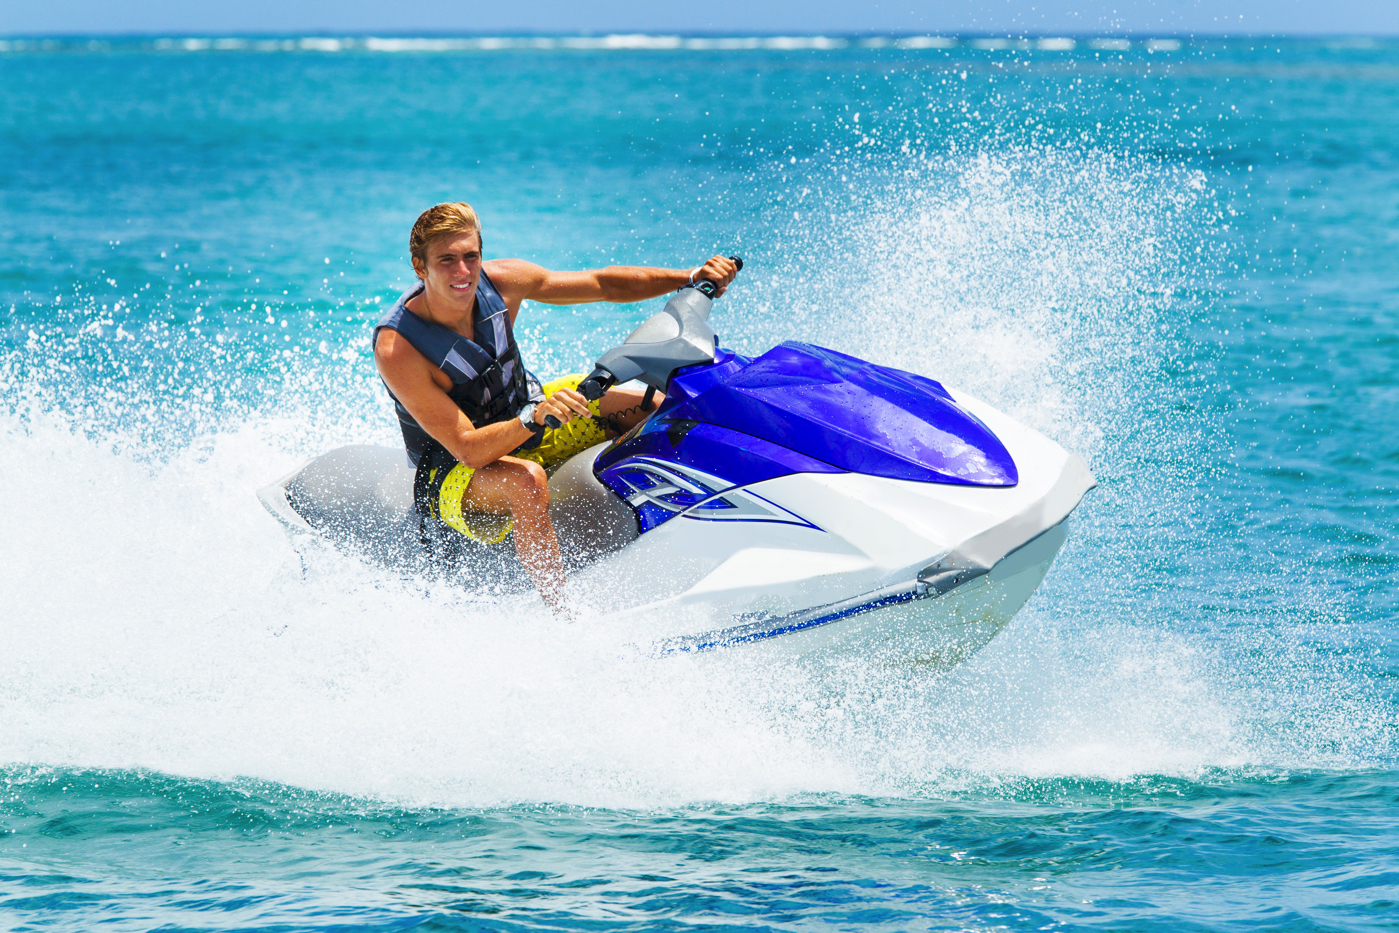 A person on a jet ski driving